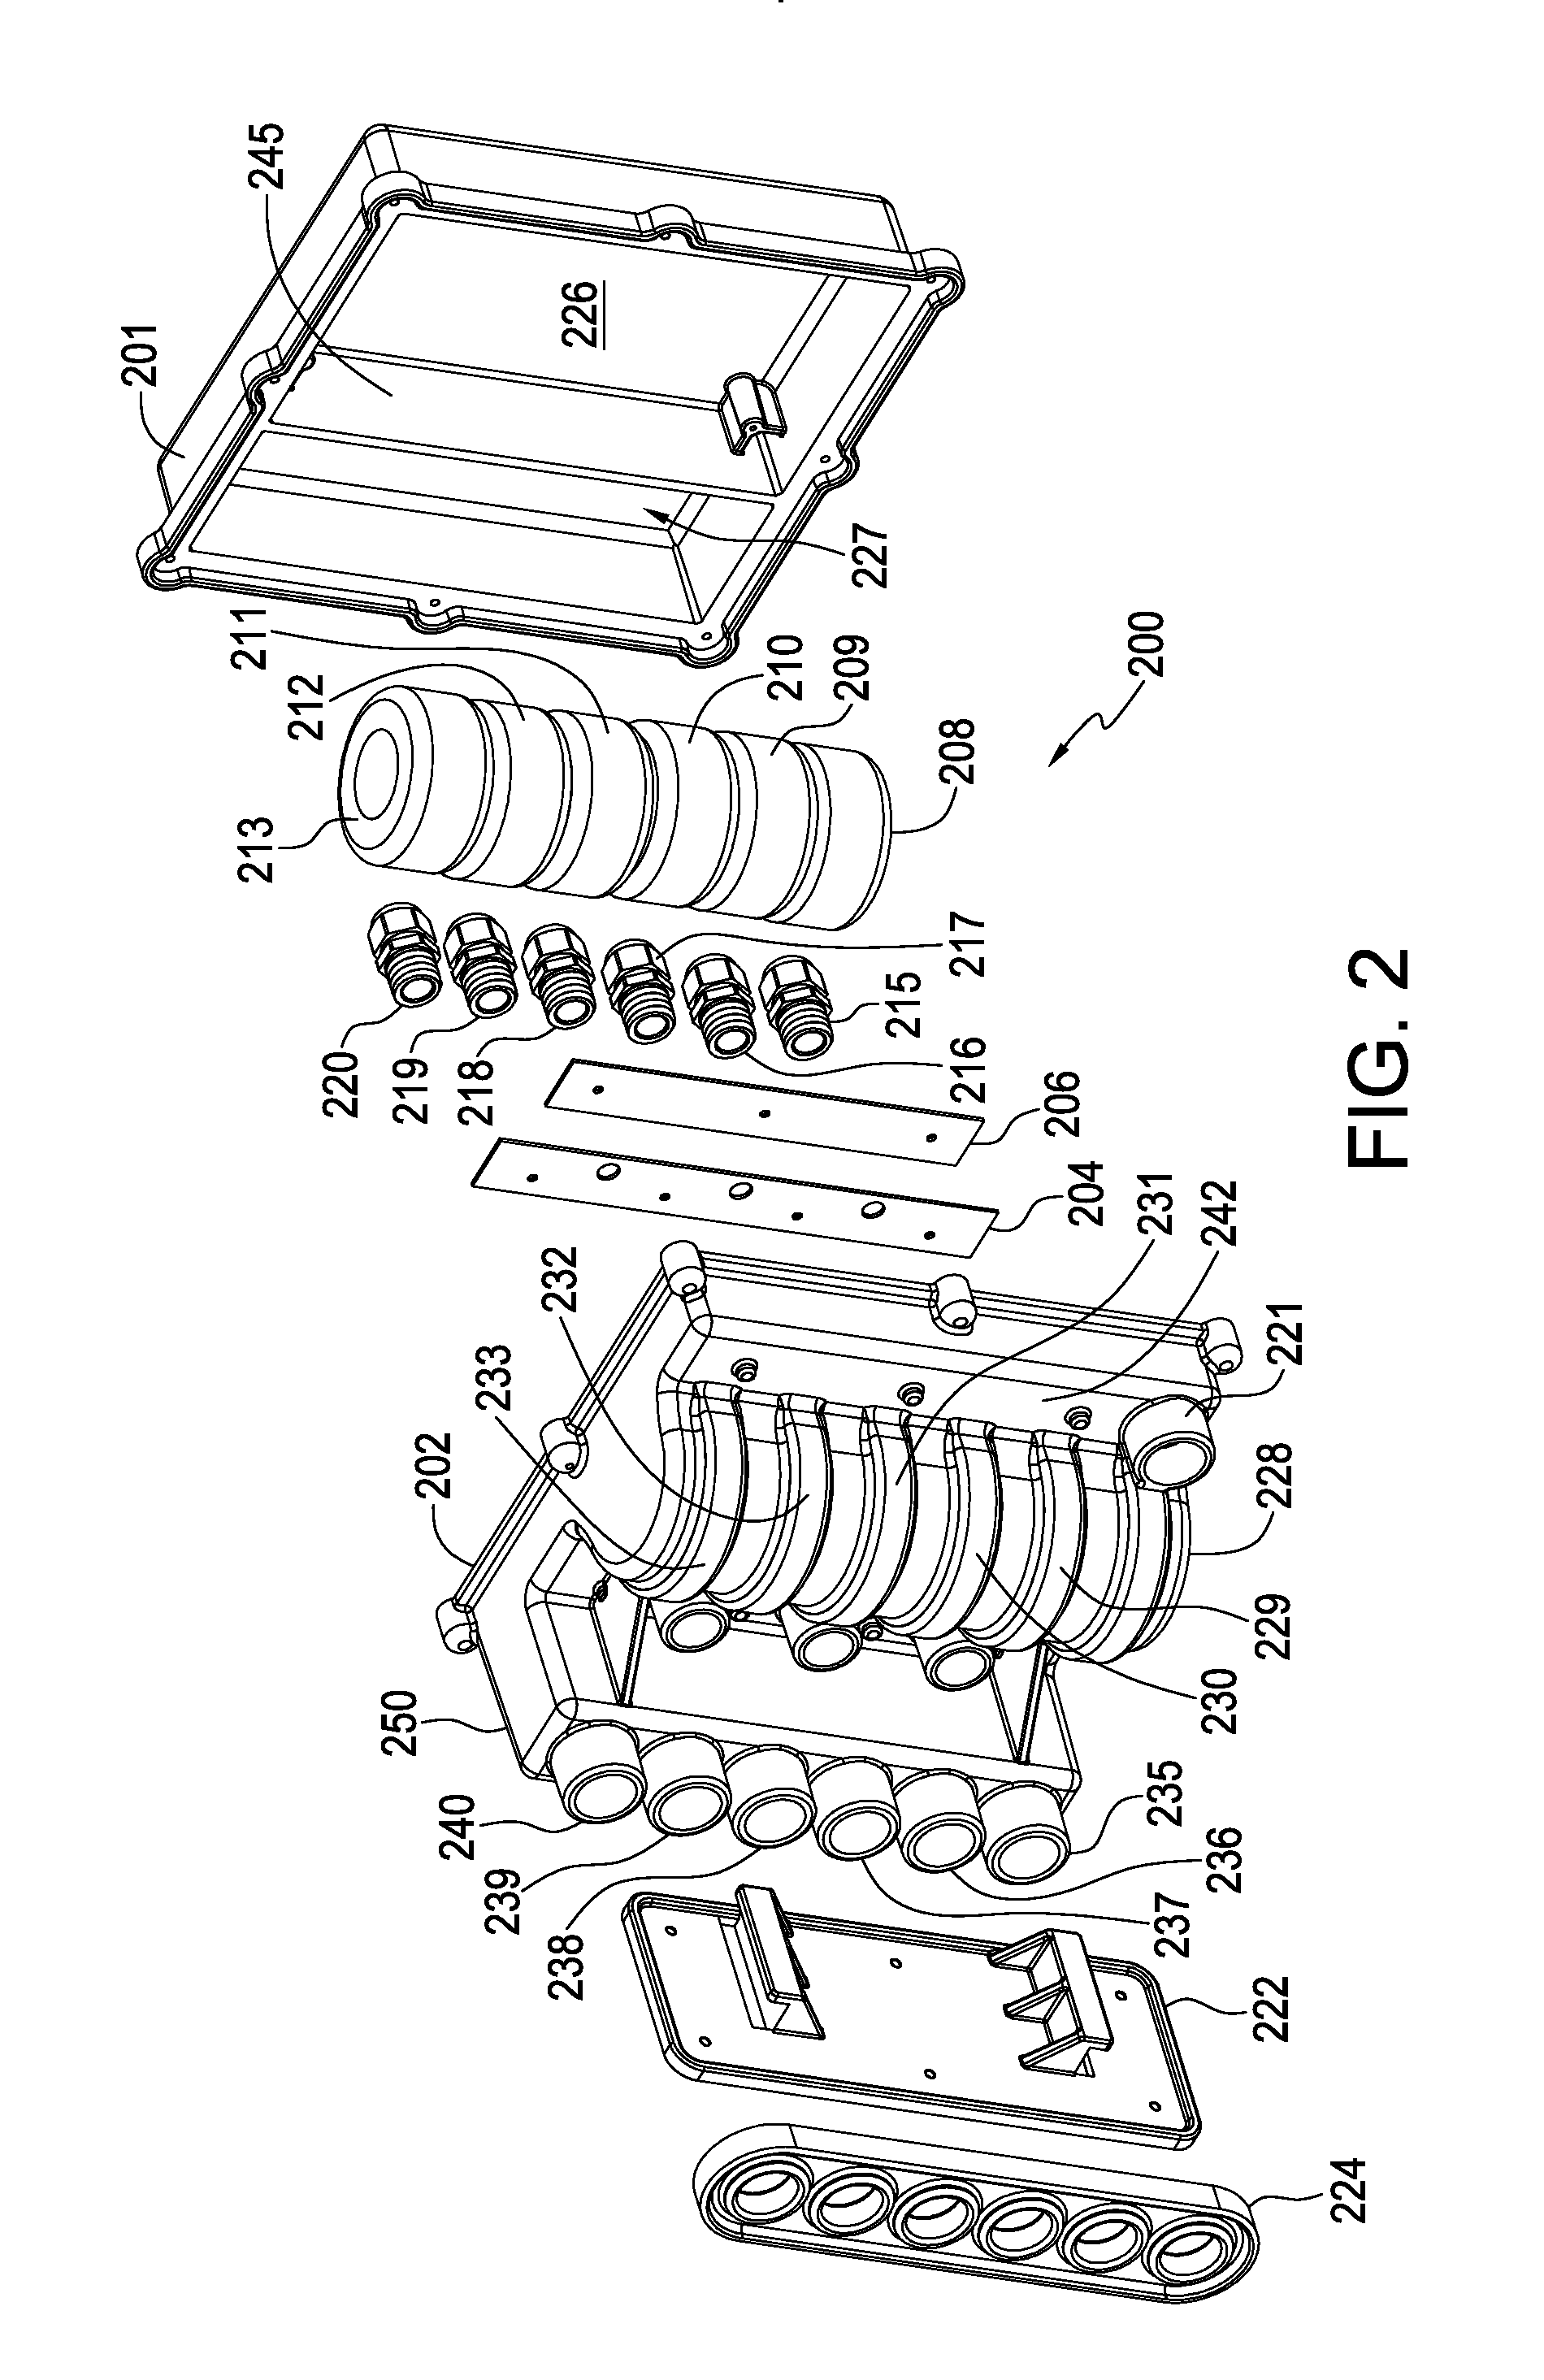 Apparatus and method for controlling and supplying power to electrical devices in high risk environments